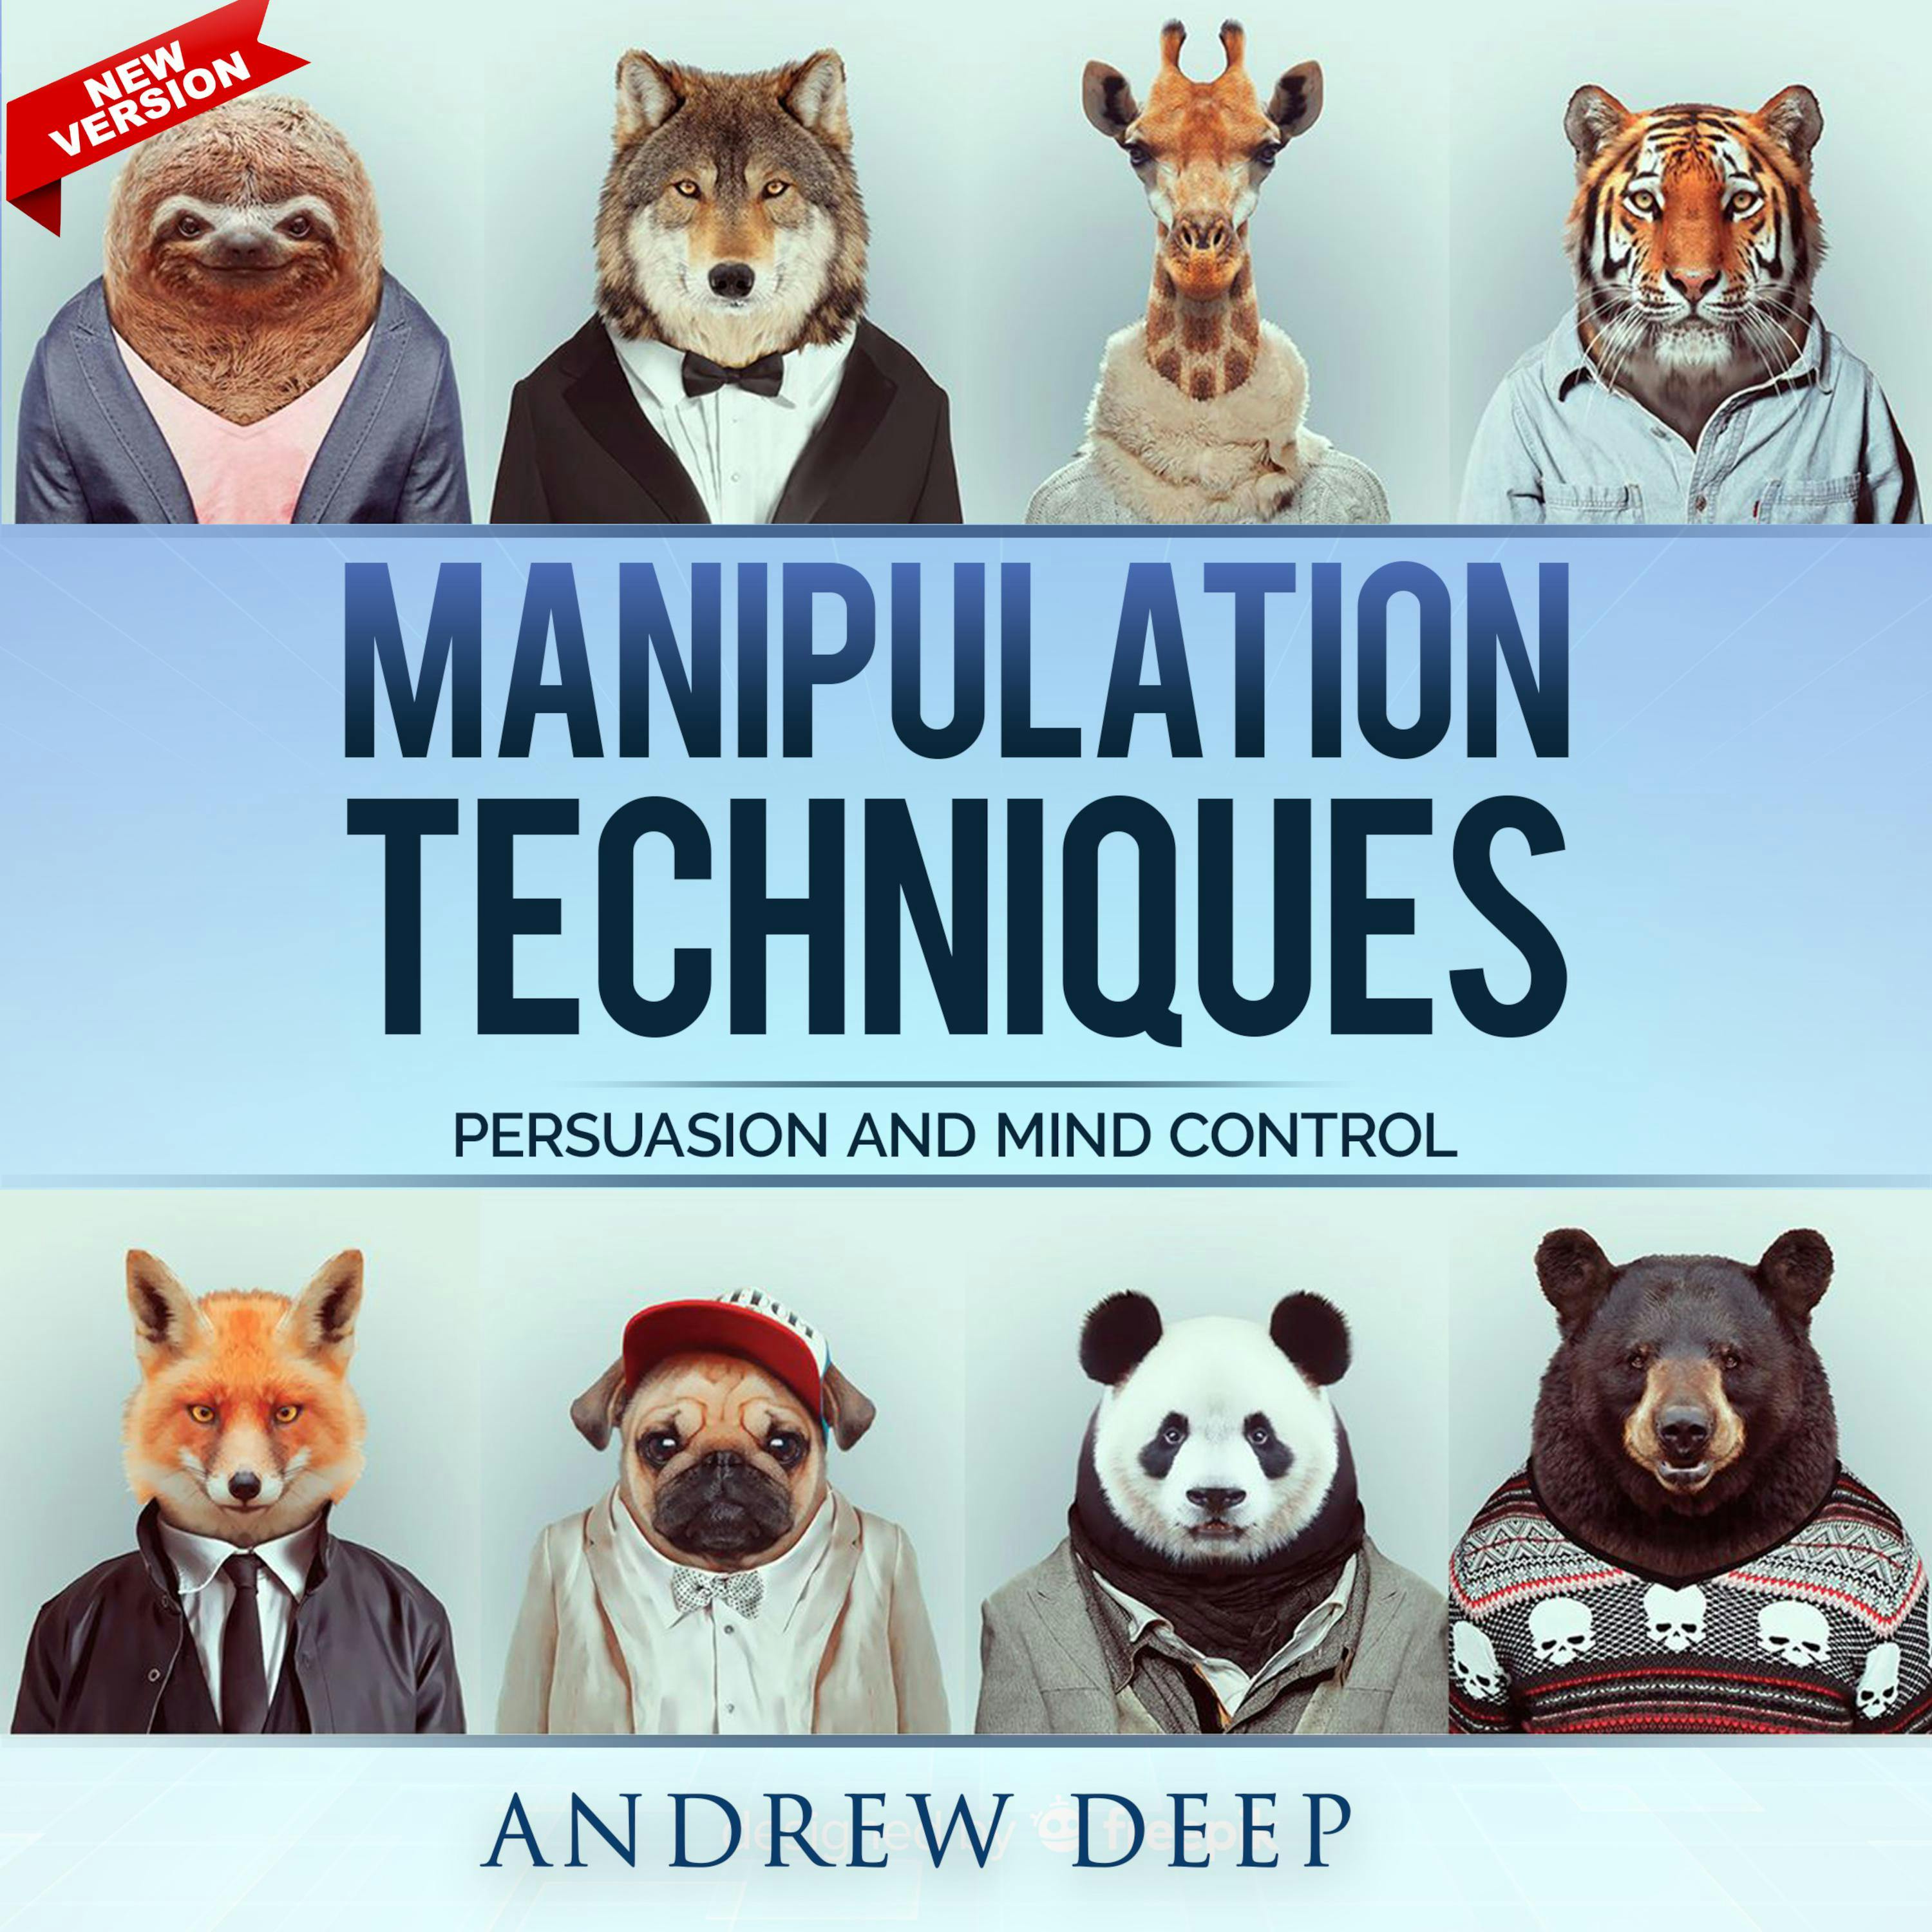 Manipulation Techniques: Persuasion and Mind Control. New Edition - Andrew Deep